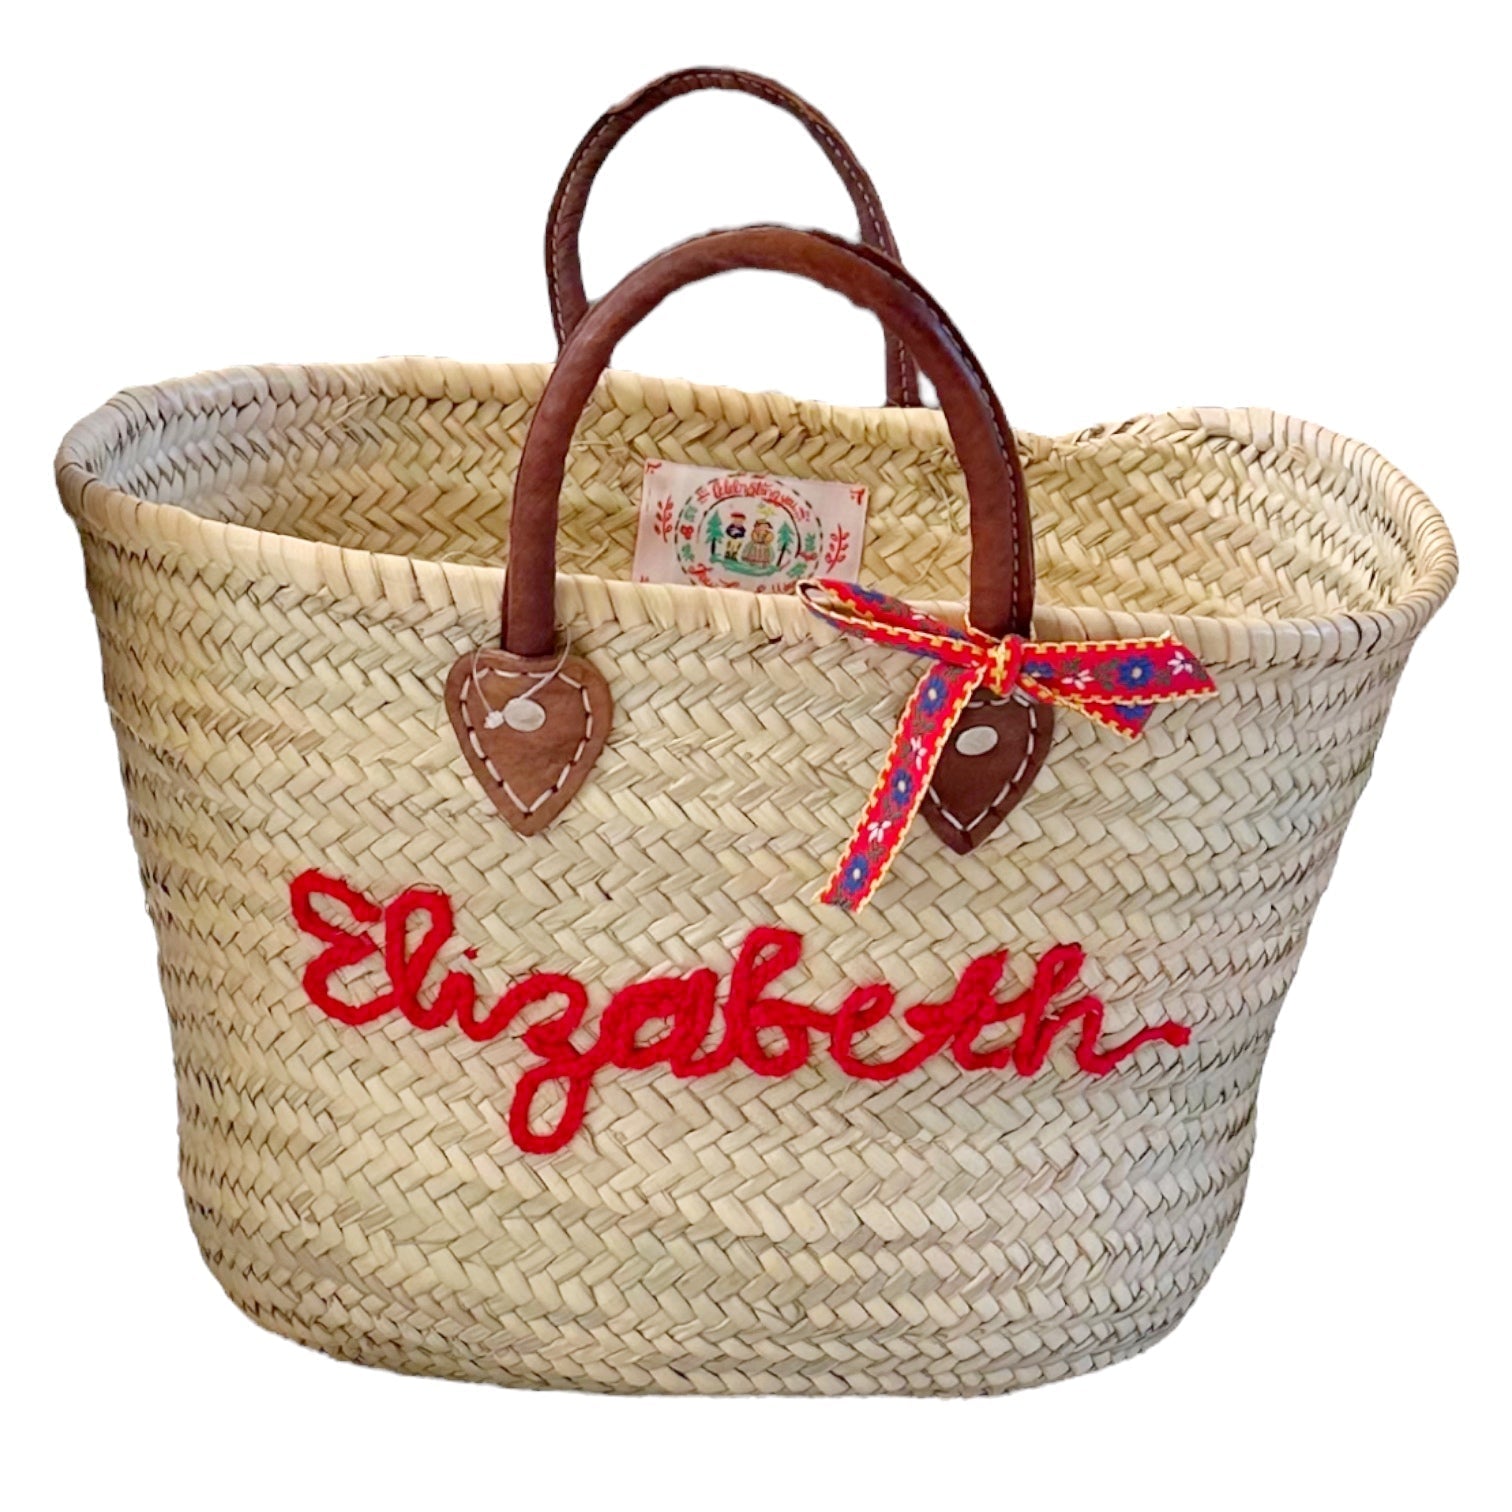 Big Embroidered Bag / Basket / French Market Basket / Straw Basket - red - Premium  from Tricia Lowenfield Design 